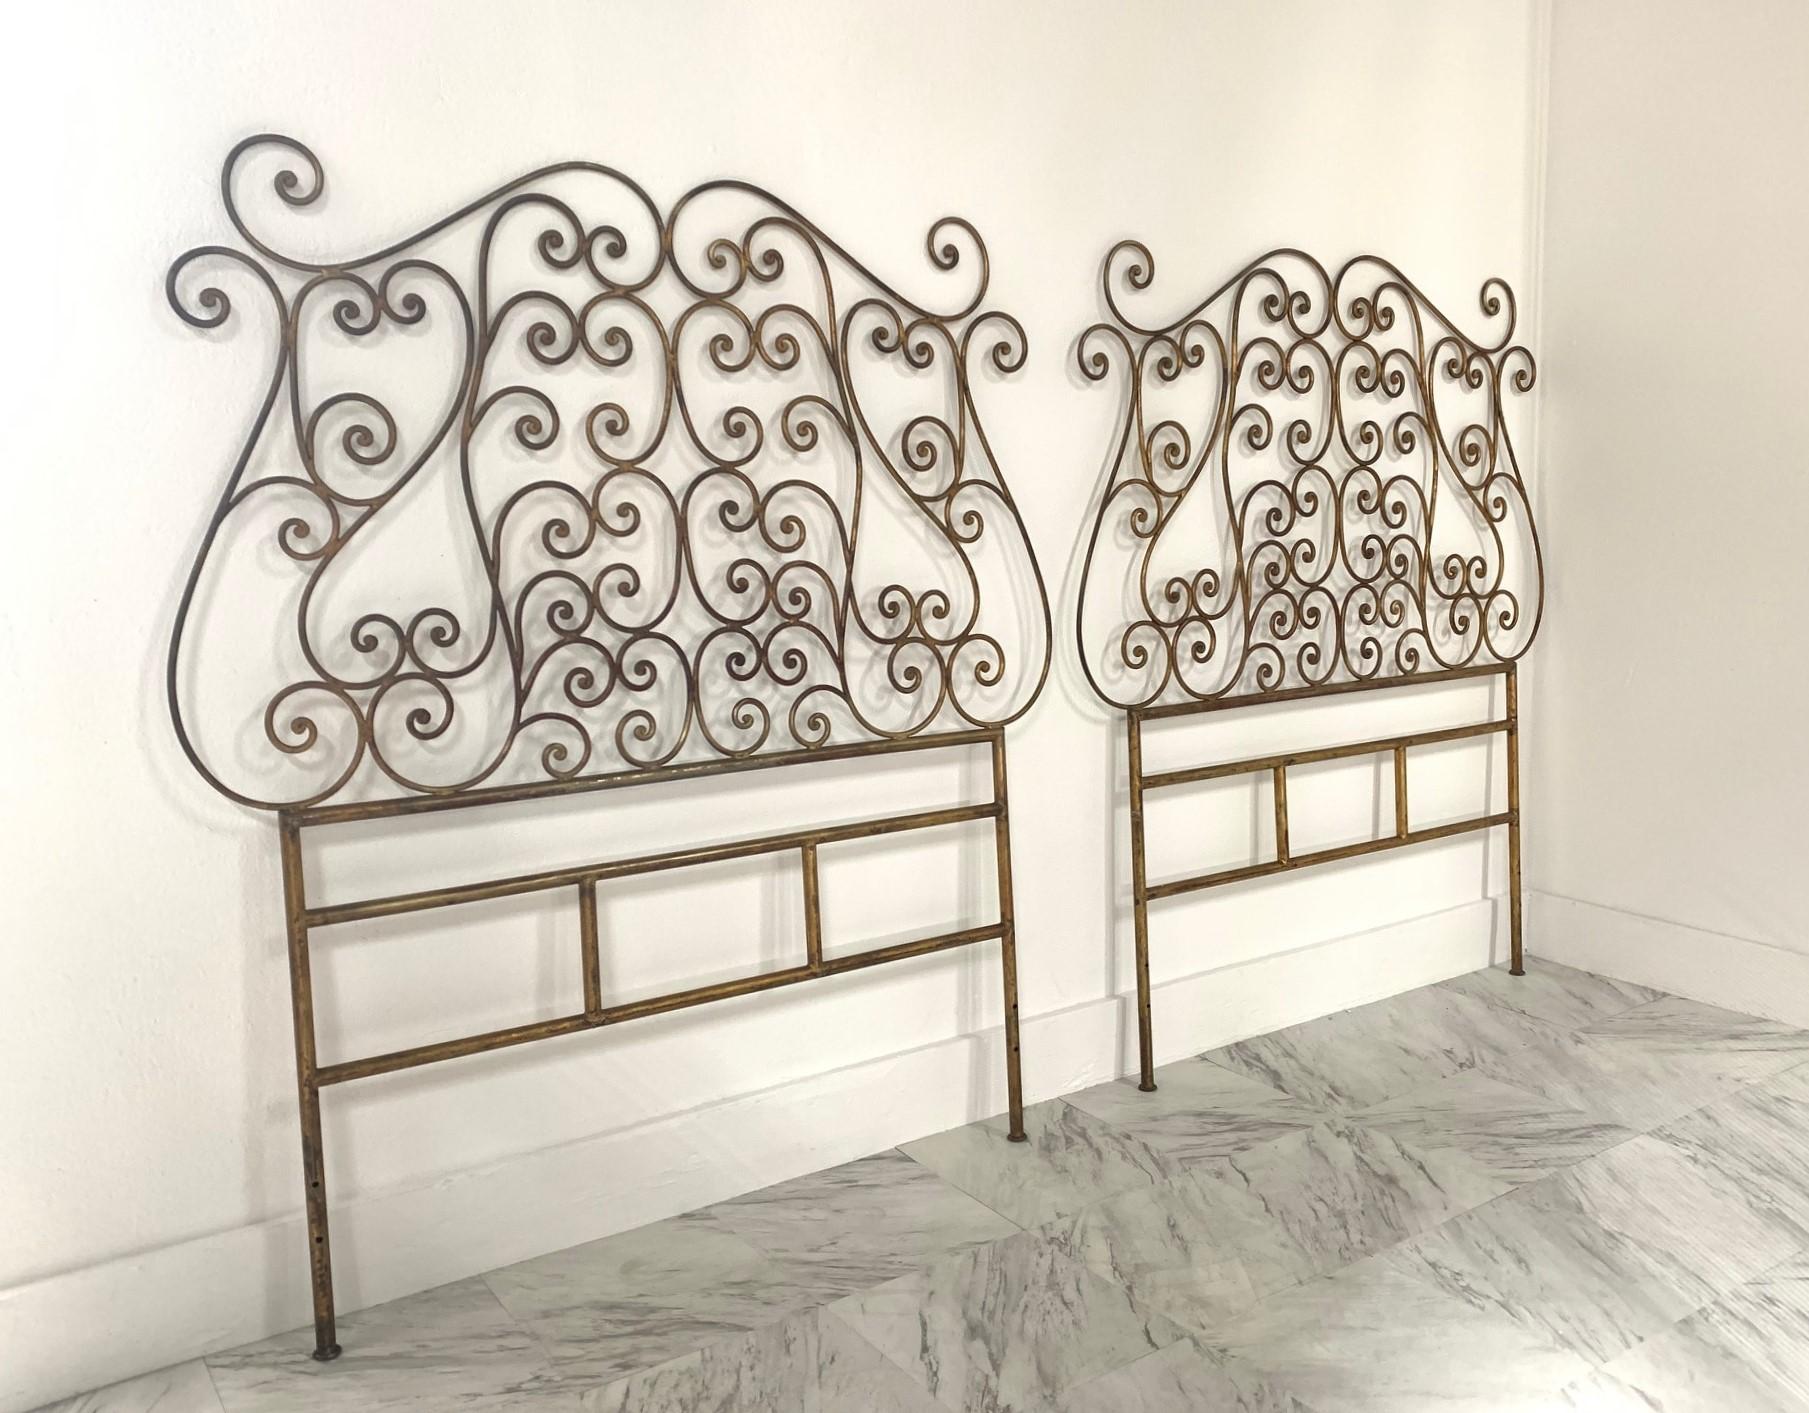 Pair of Italian gilt metal twin-size headboards. Stunning pair of decorative gilt metal, twin size headboards with a lovely scrolled pattern.

Measures (overall) 53H x 47W (at it's widest).
Bottom of frame measures approx 39